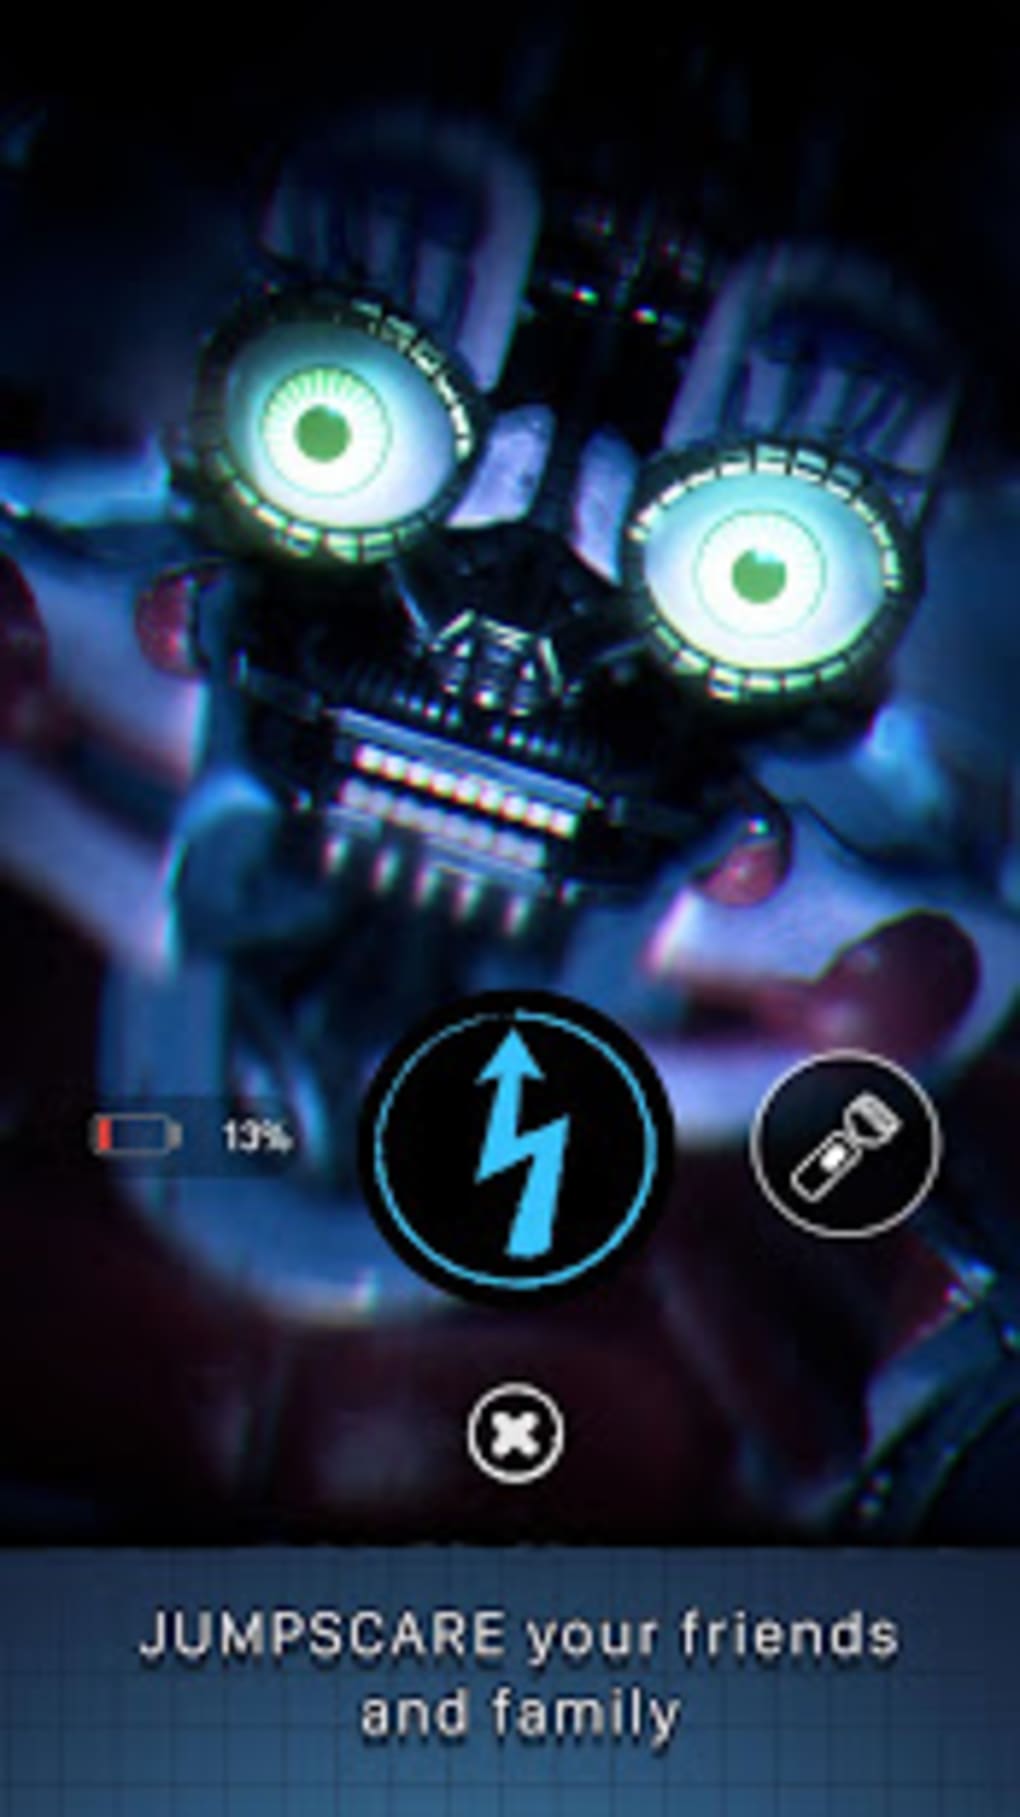 Five Nights At Freddy S Ar Apk For Android Download - unlimited robux tricks apk 10 download free apk from apksum